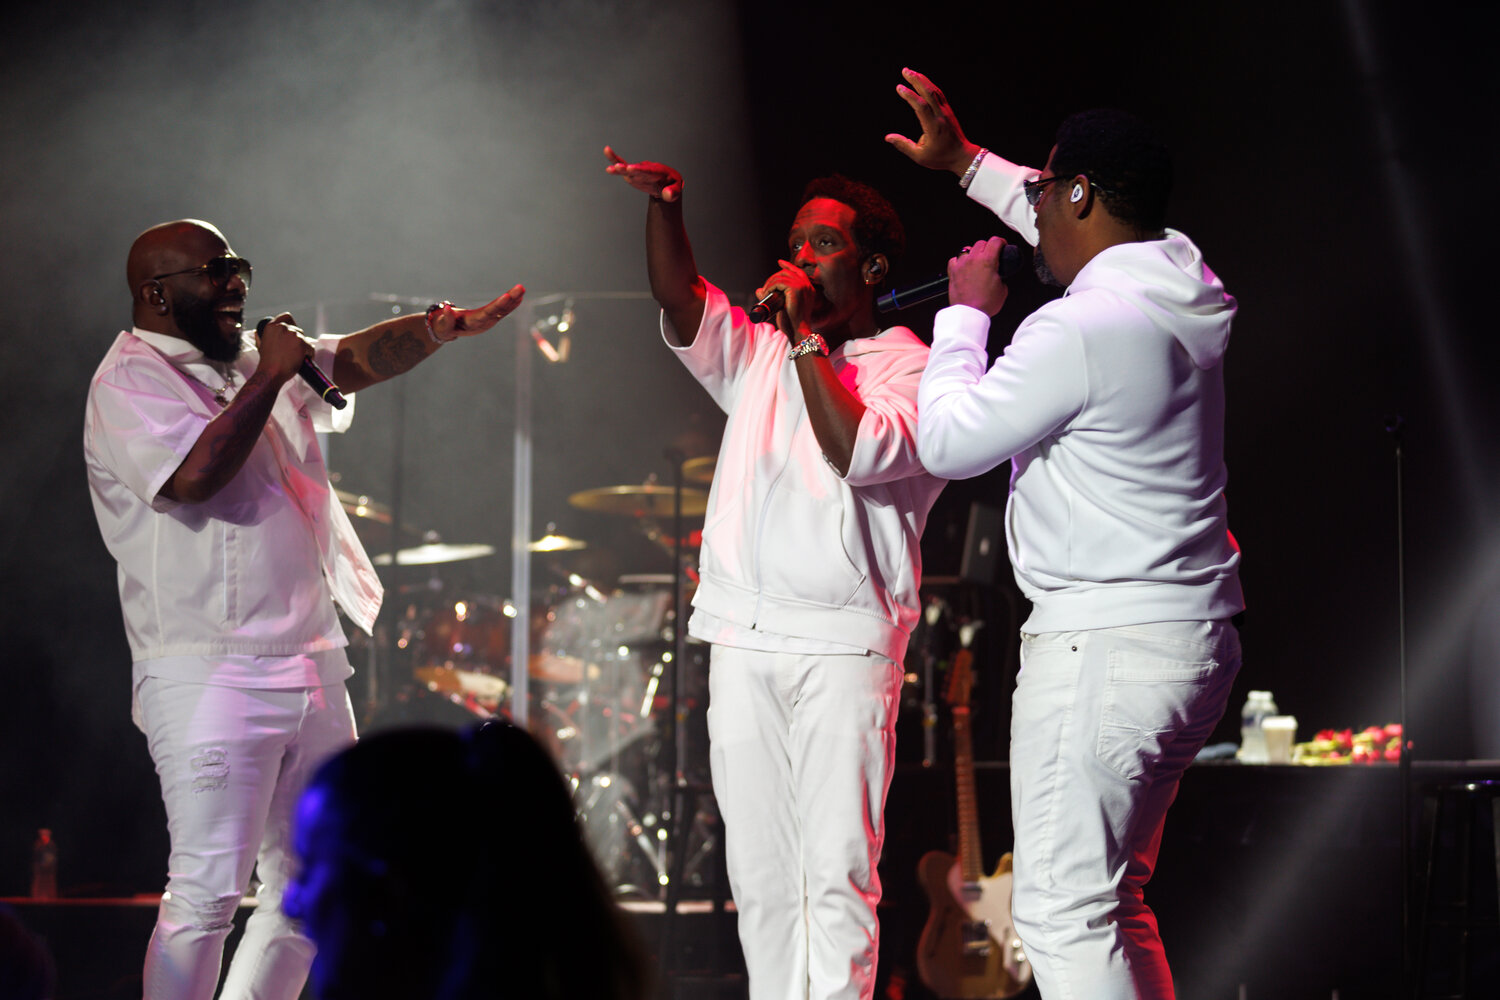 Boyz II Men sings a fan favorite during the 2023 Community Concerts season finale at the Crown Theatre. Photo by Tony Wooten